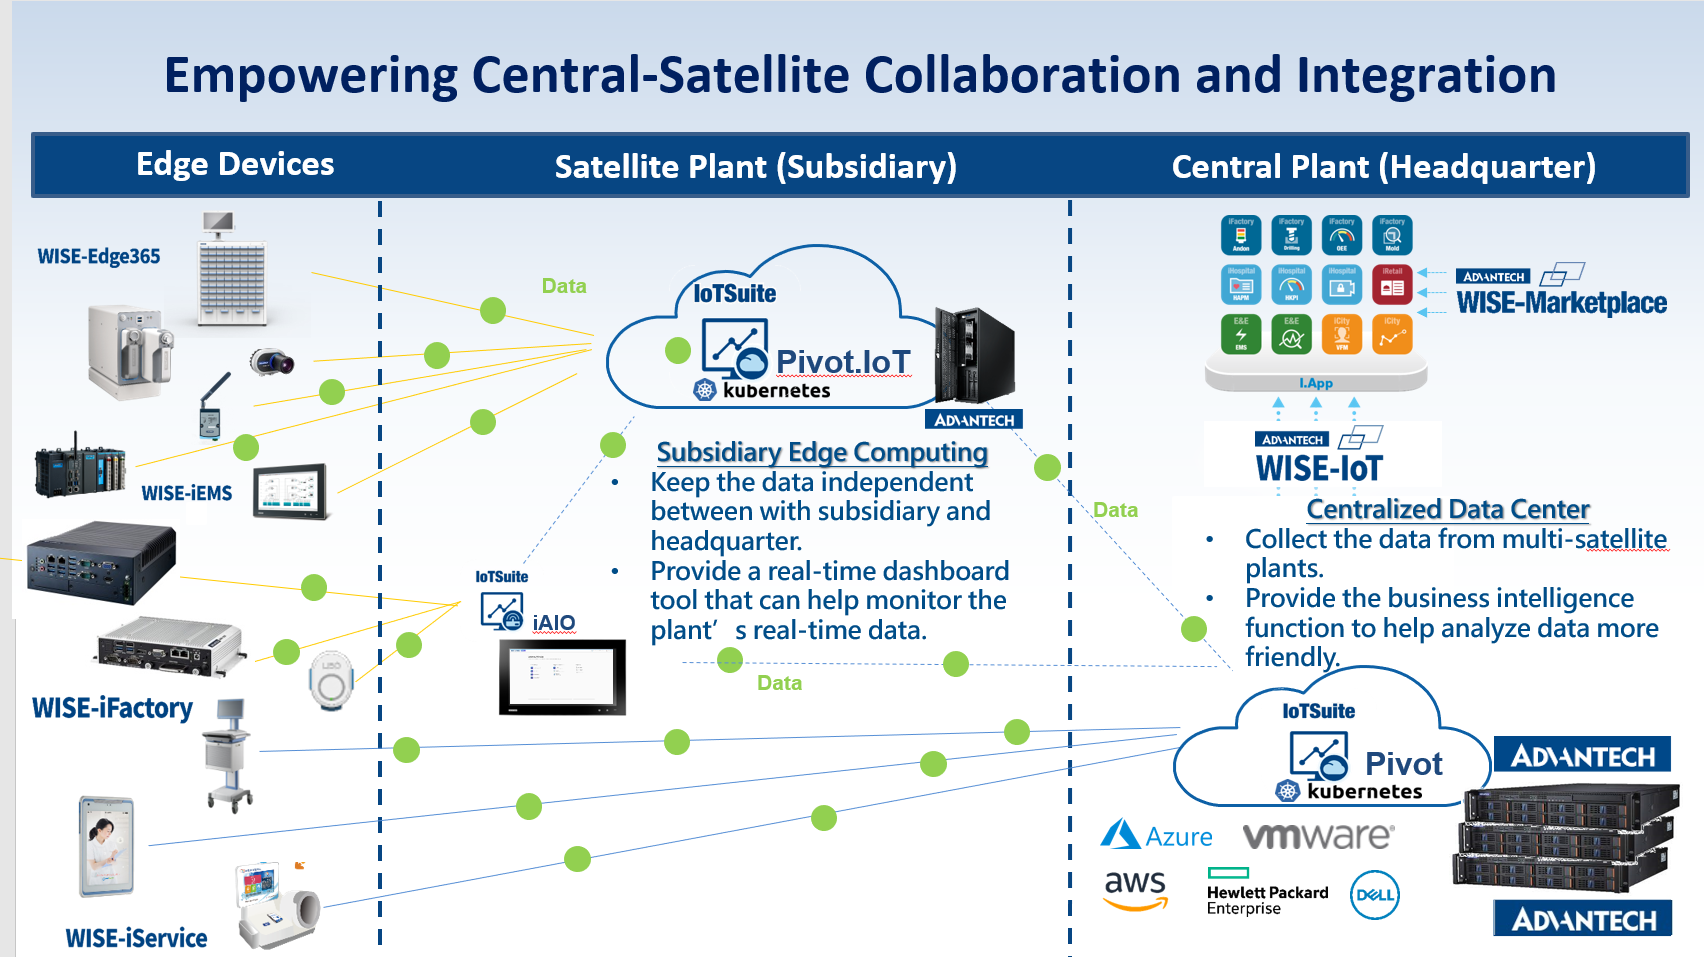 Empowering Central-Satellite Collaboration and Integration